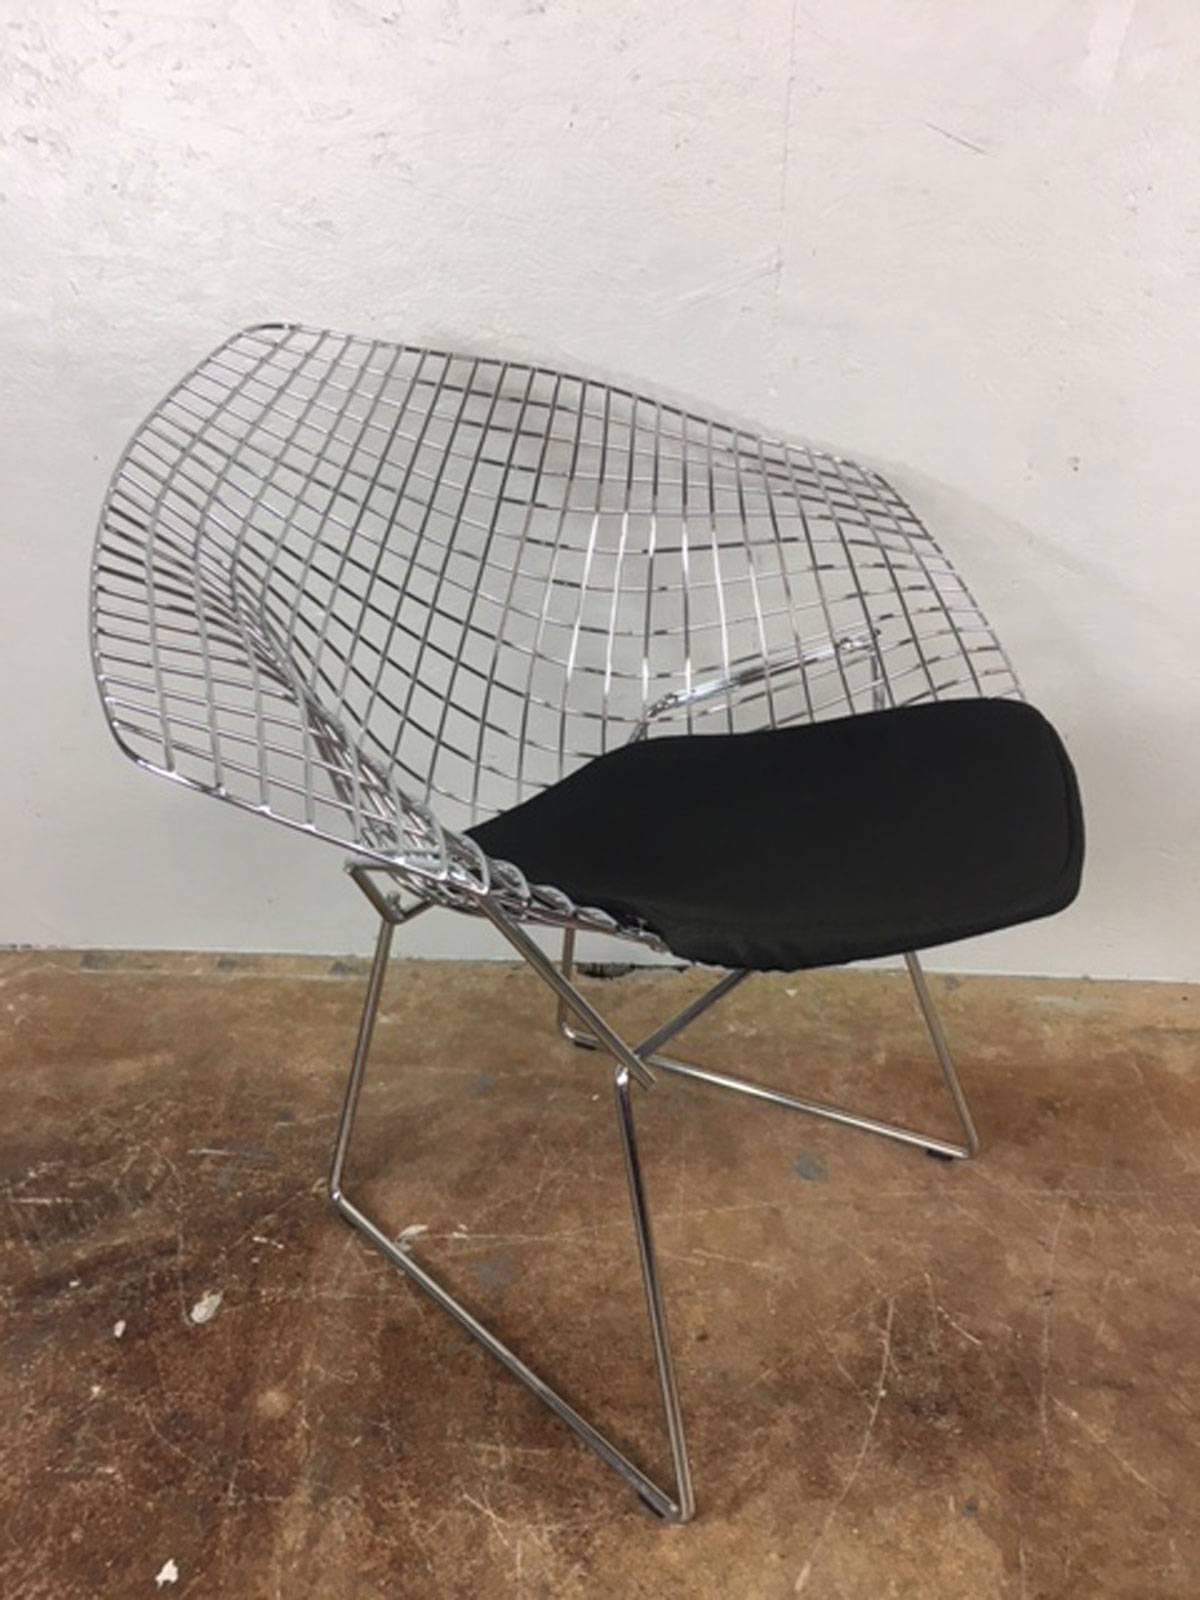 Harry Bertoia diamond chair with black wool pad manufactured by Knoll. Stainless steel and welded steel rod construction. Two chairs available. Price is per chair. Measure: Seat height is 16 inches.